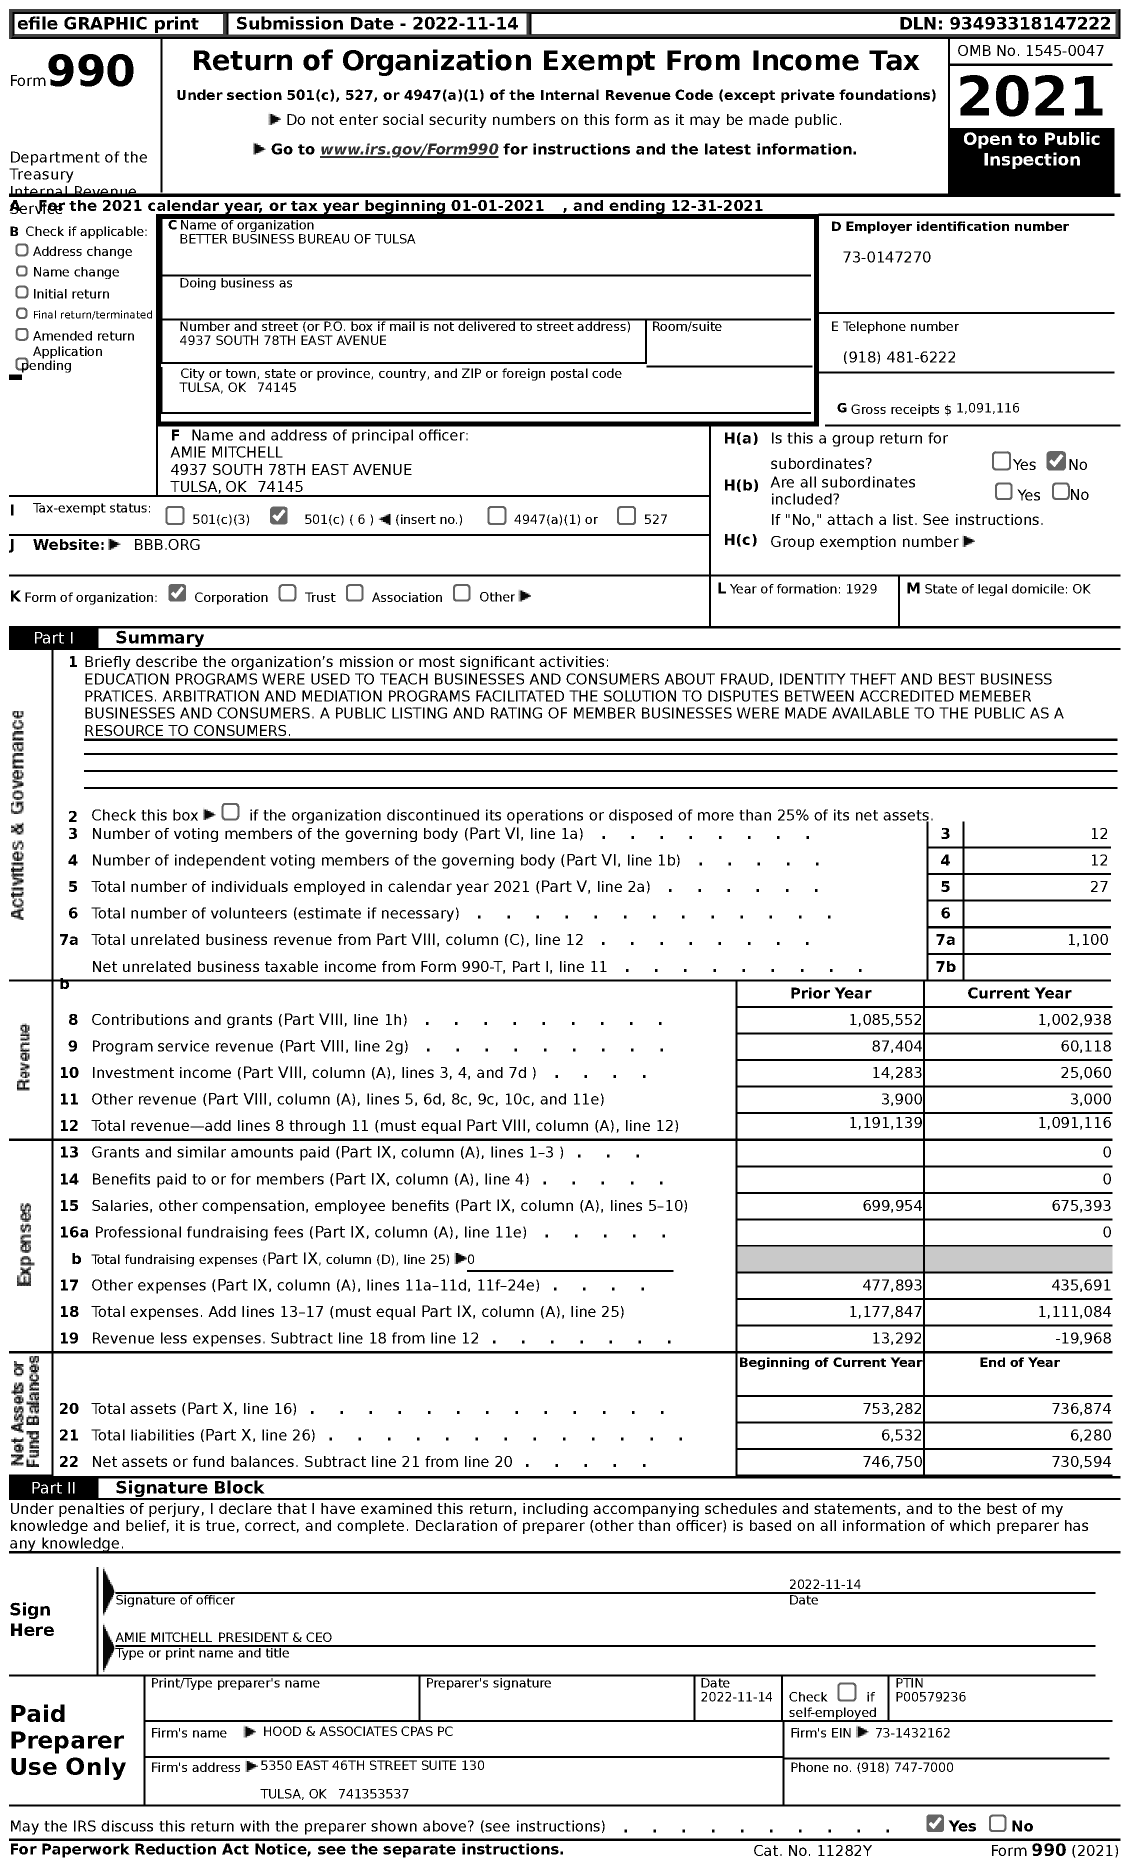 Image of first page of 2021 Form 990 for Better Business Bureau of Tulsa (BBB)